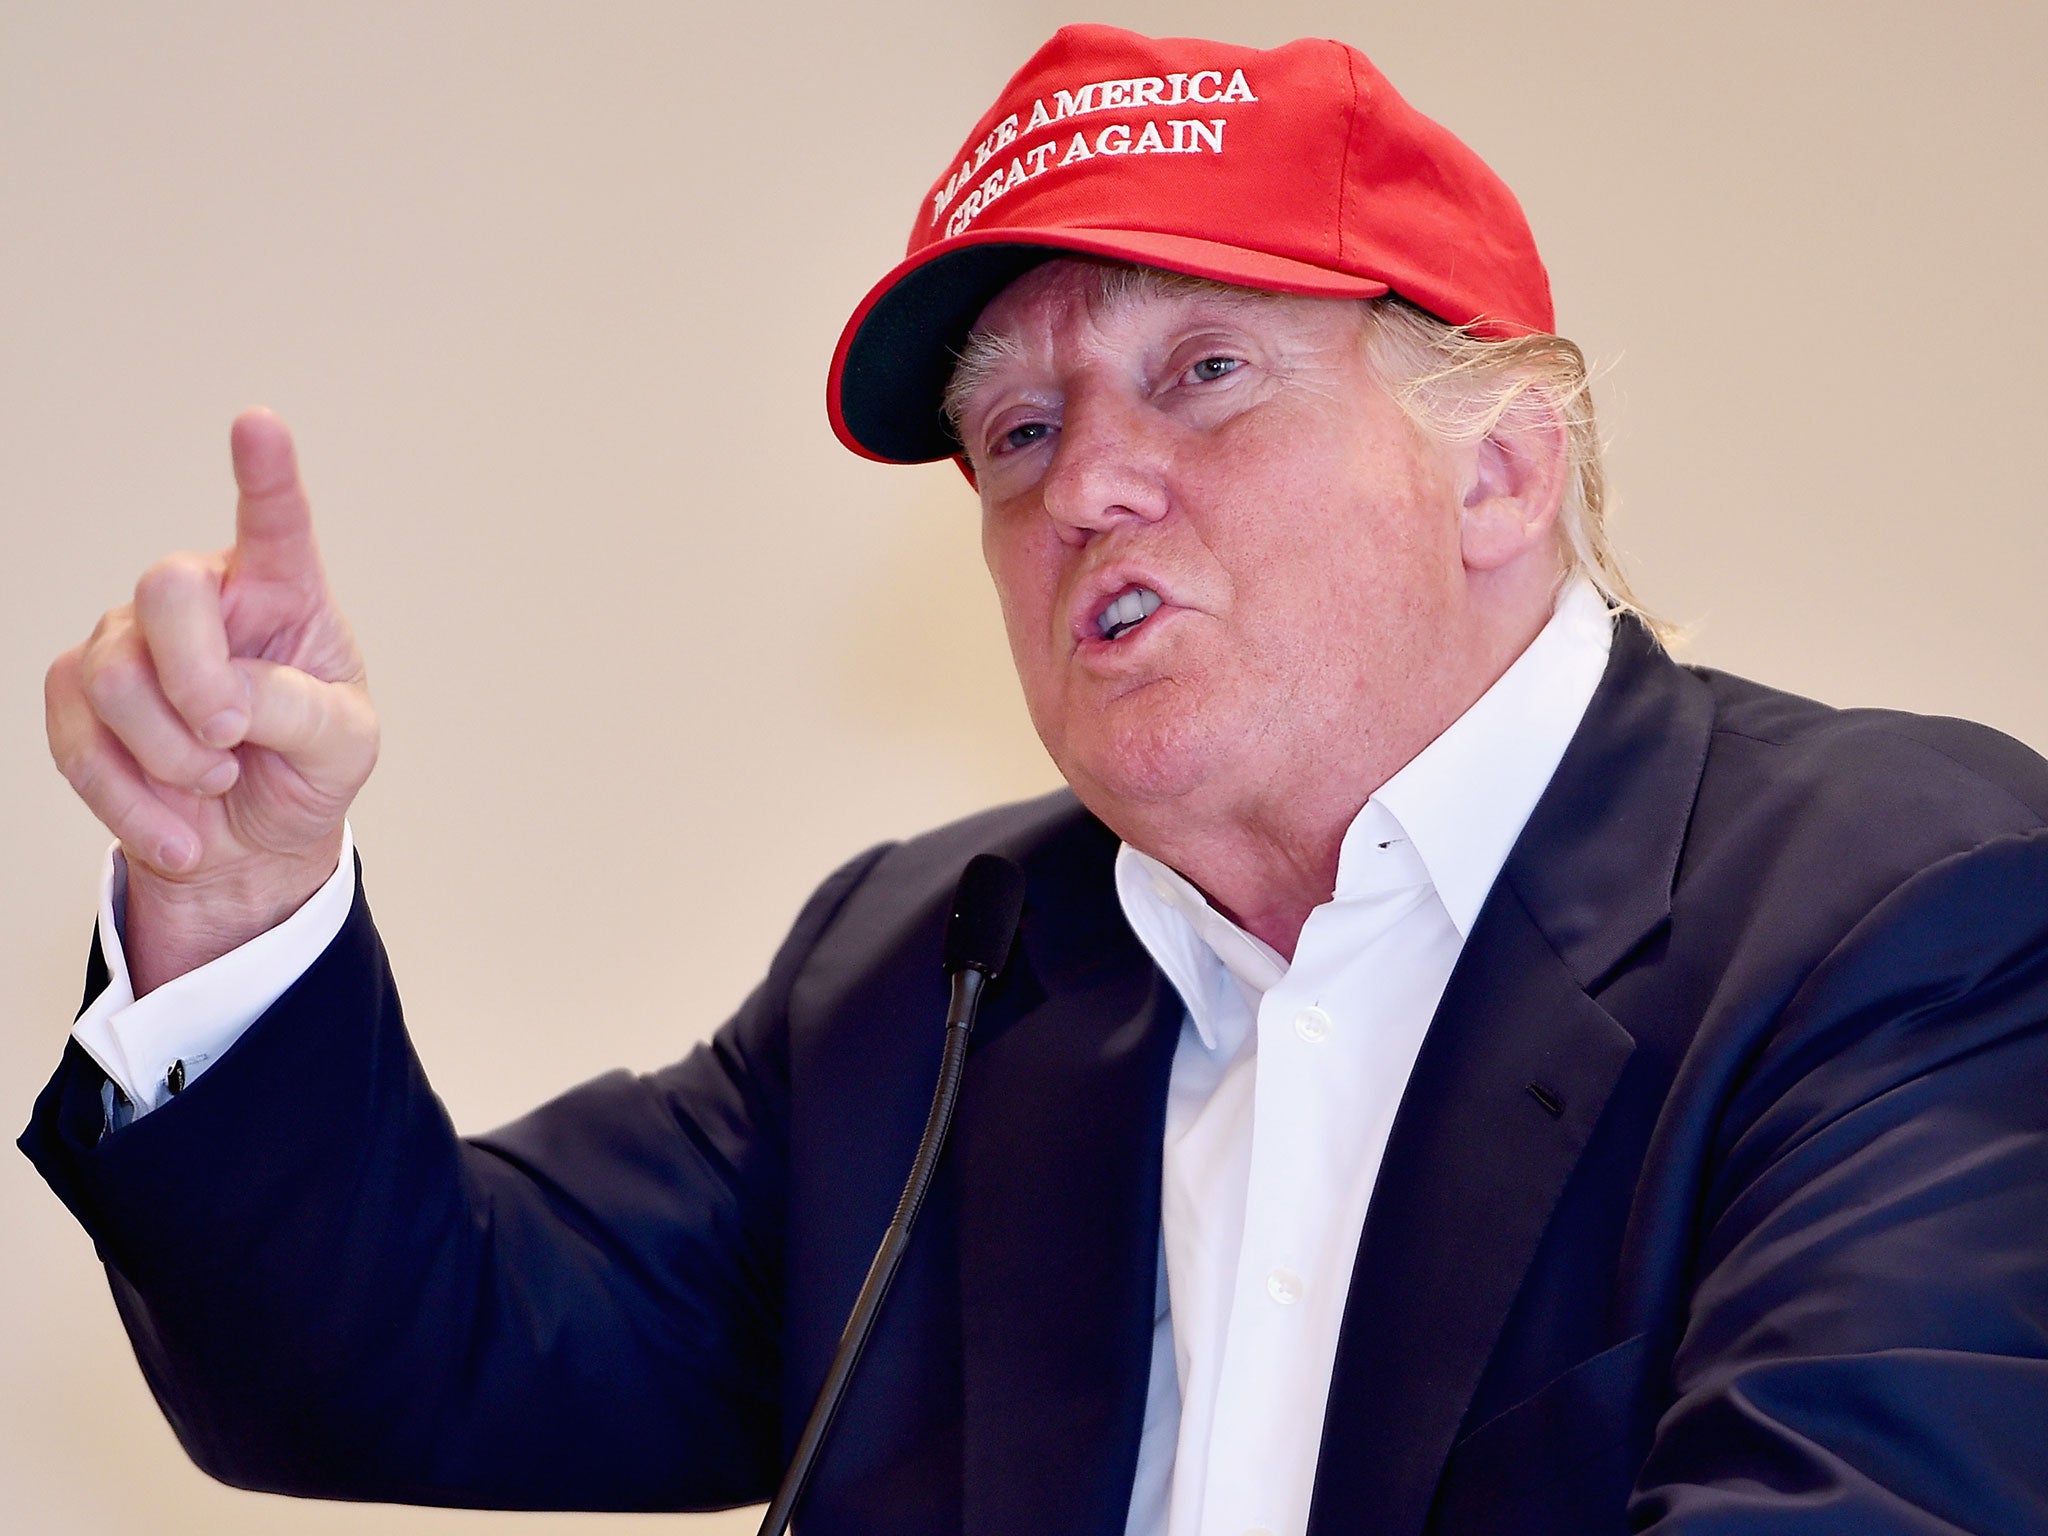 Republican Presidential Candidate Donald Trump has sacked a staffer over a Facebook post